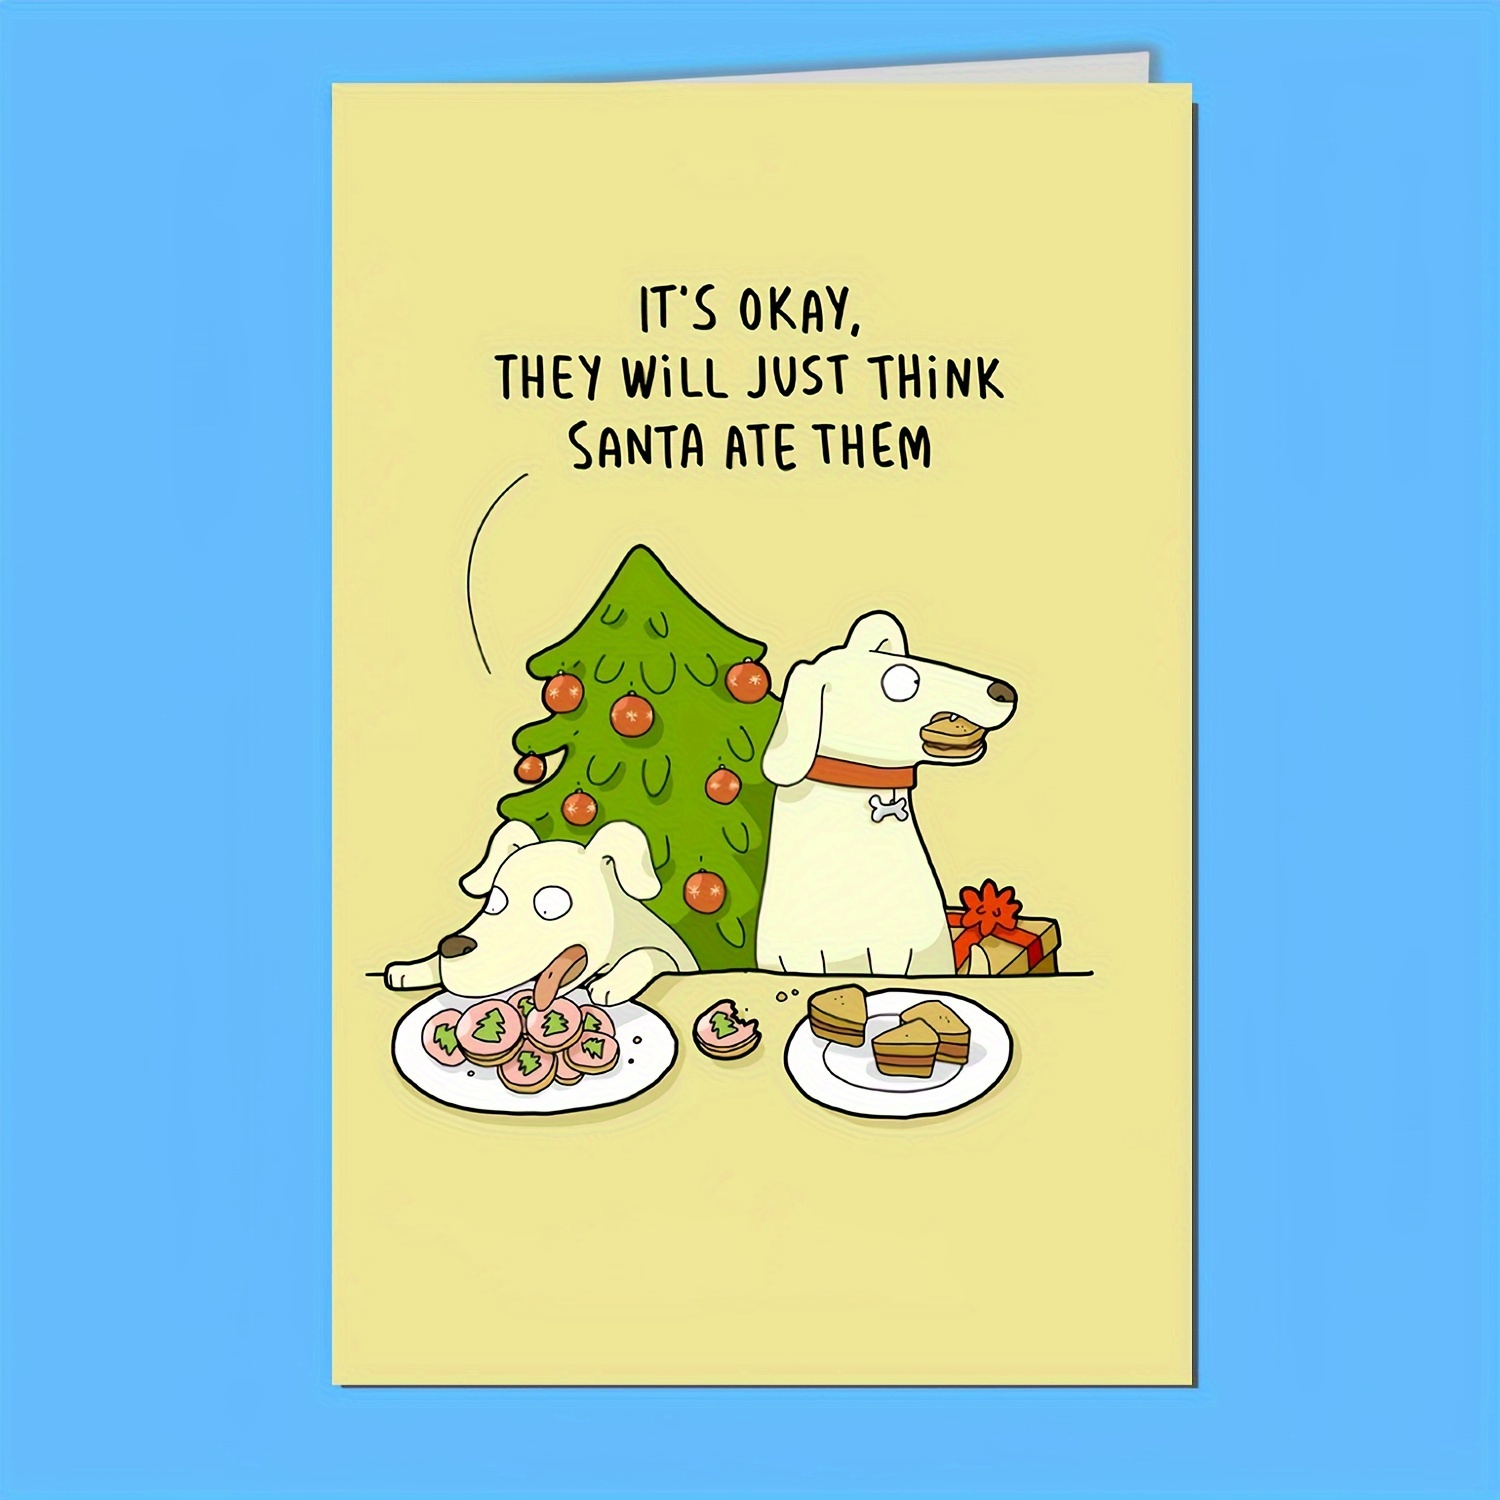 

Festive Christmas Card: Humorous Dog Illustration & Text - Perfect For Sending To Family, Friends, Siblings, Or Anyone For Christmas, Birthday, Friendship Day, Or Any Occasion - Includes Envelope